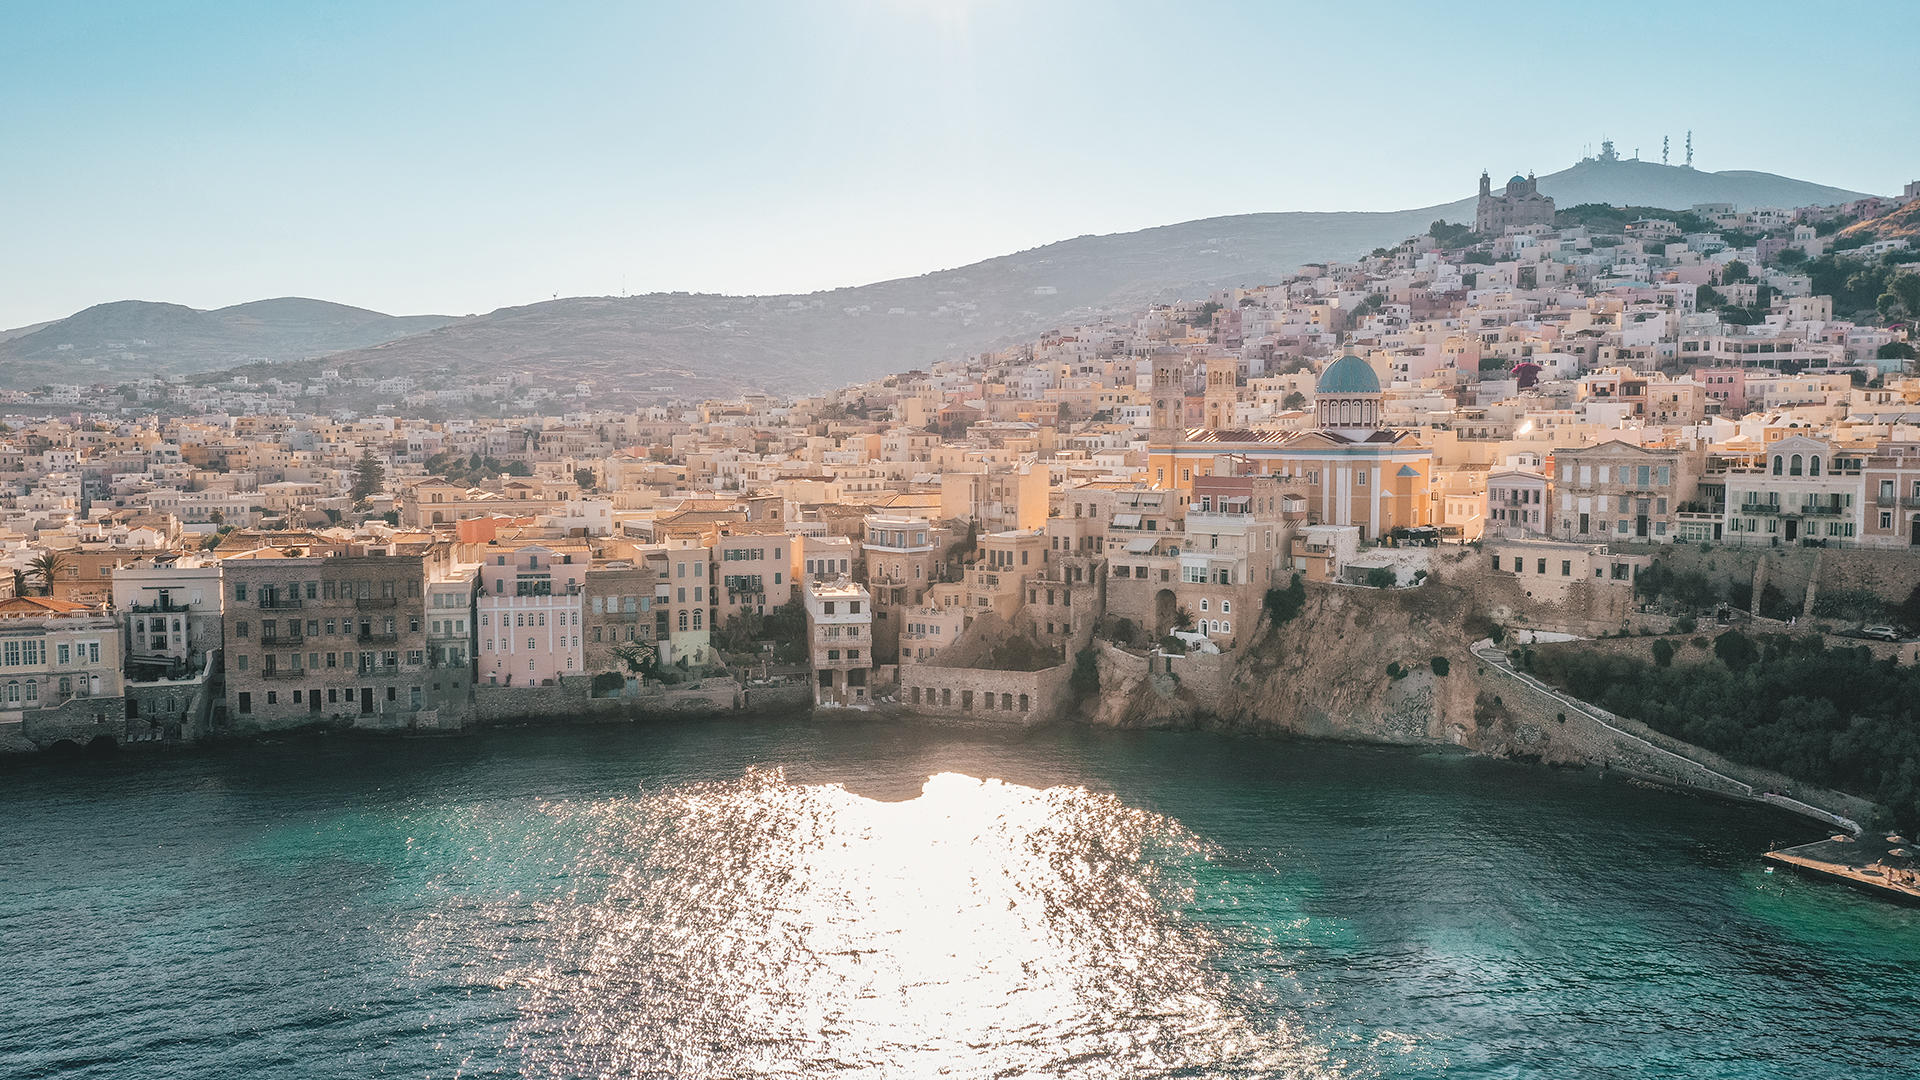 The most prestigious district of Ermoupoli, Vaporia is the residential legacy of Syros’ glory years